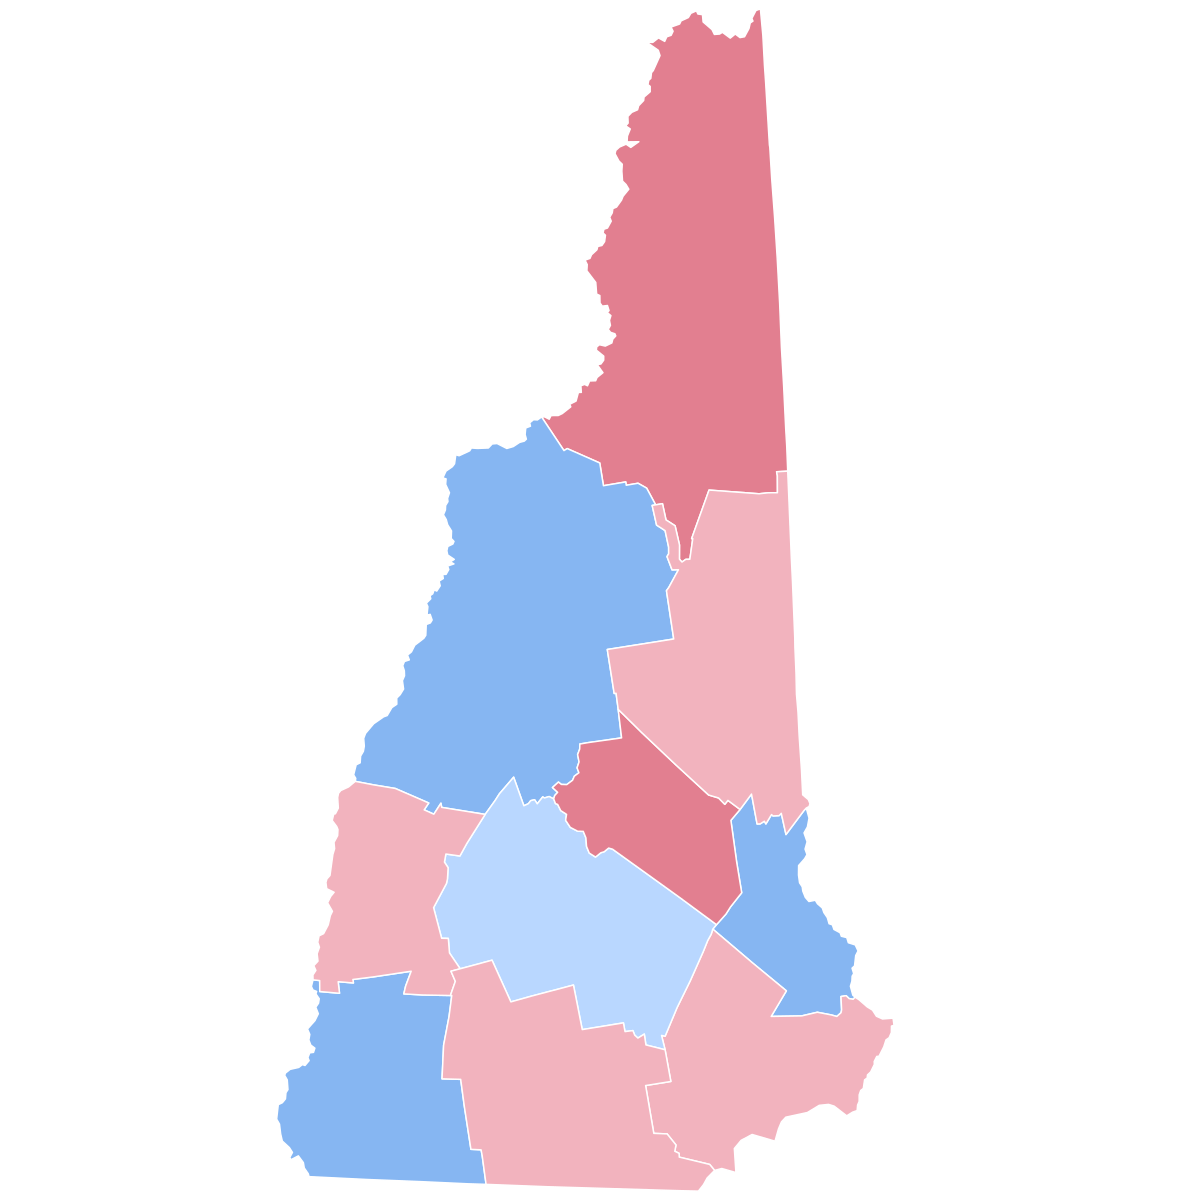 2016 united states presidential election in new hampshire